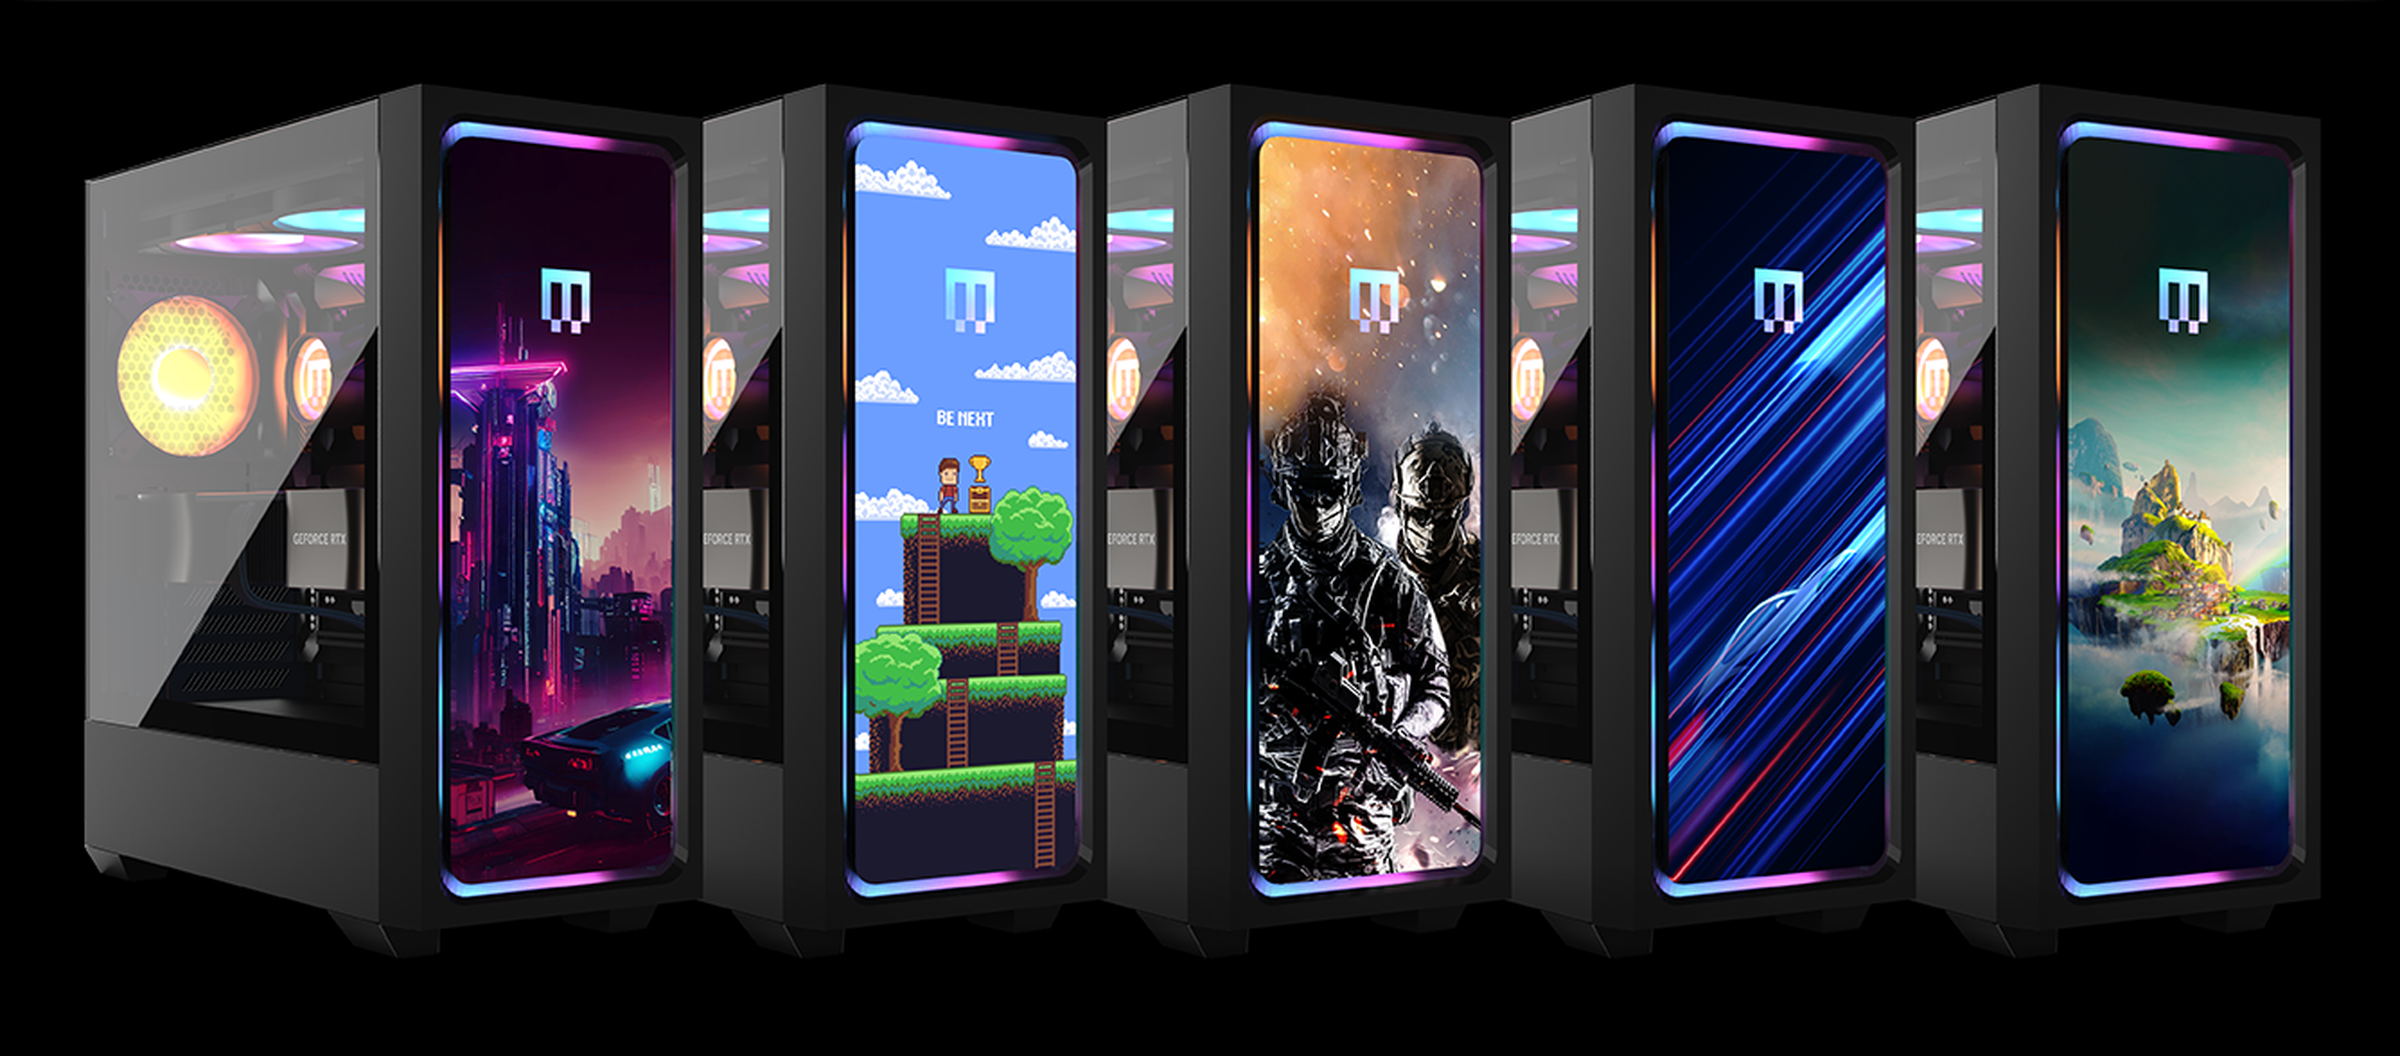 Led-backlit artwork glows brightly from video game landscapes and album covers atop these interchangeable front panels.